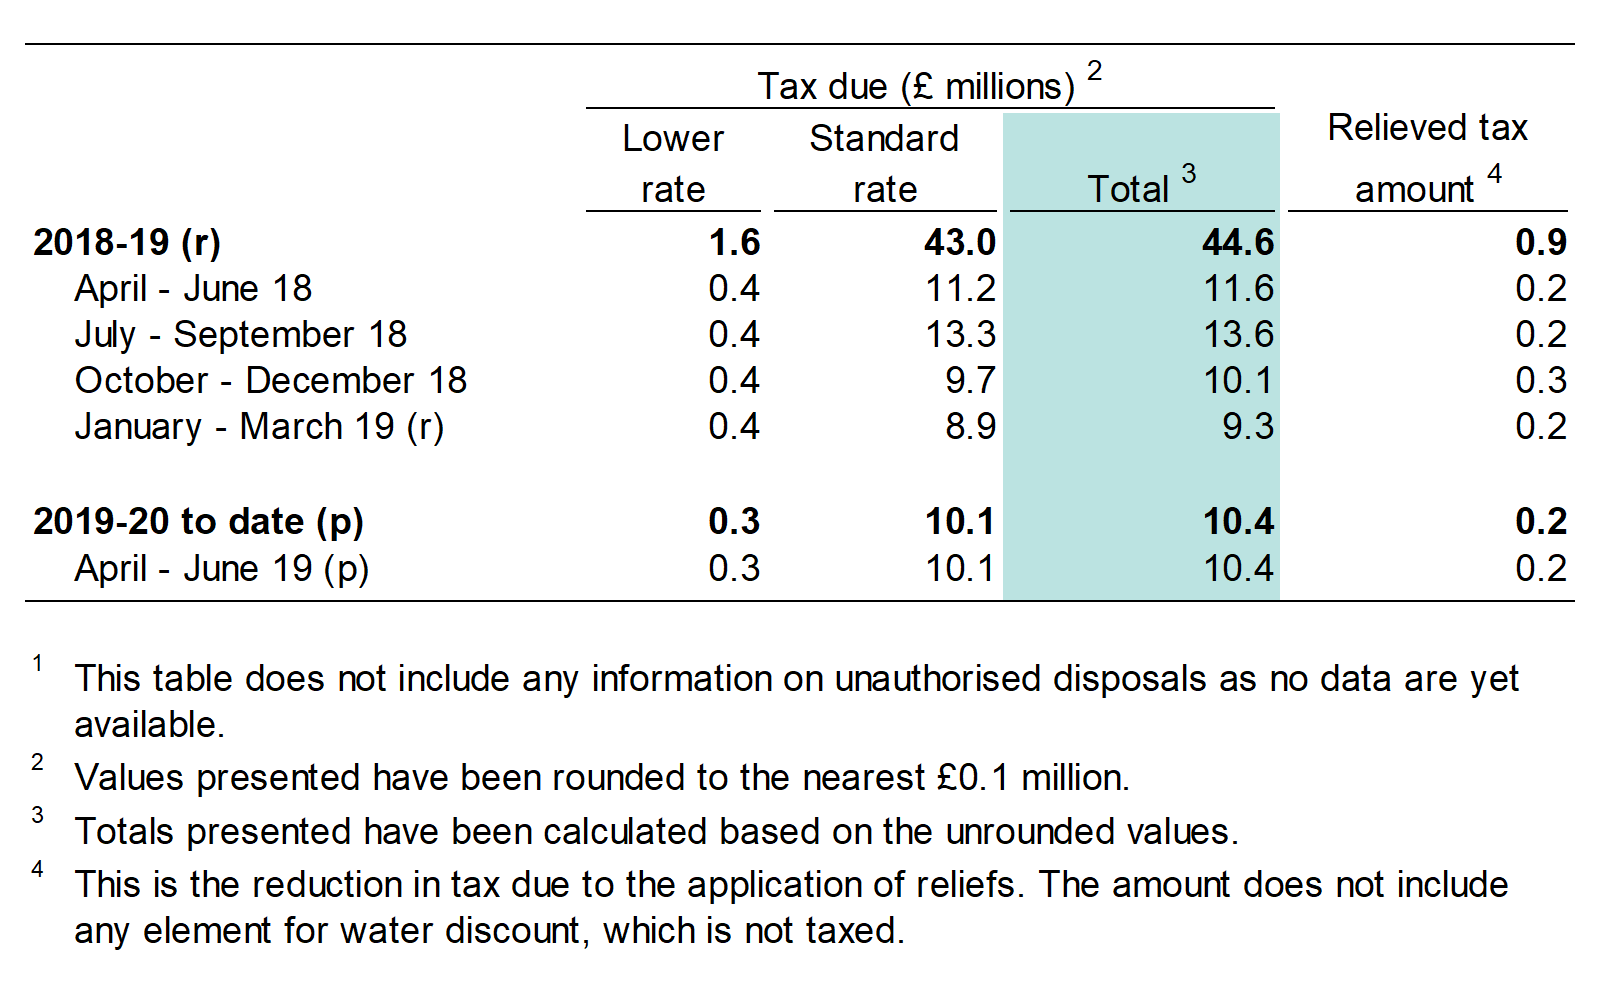 Table 1b shows the tax due on waste disposed to landfill, by tax rate and by quarter.